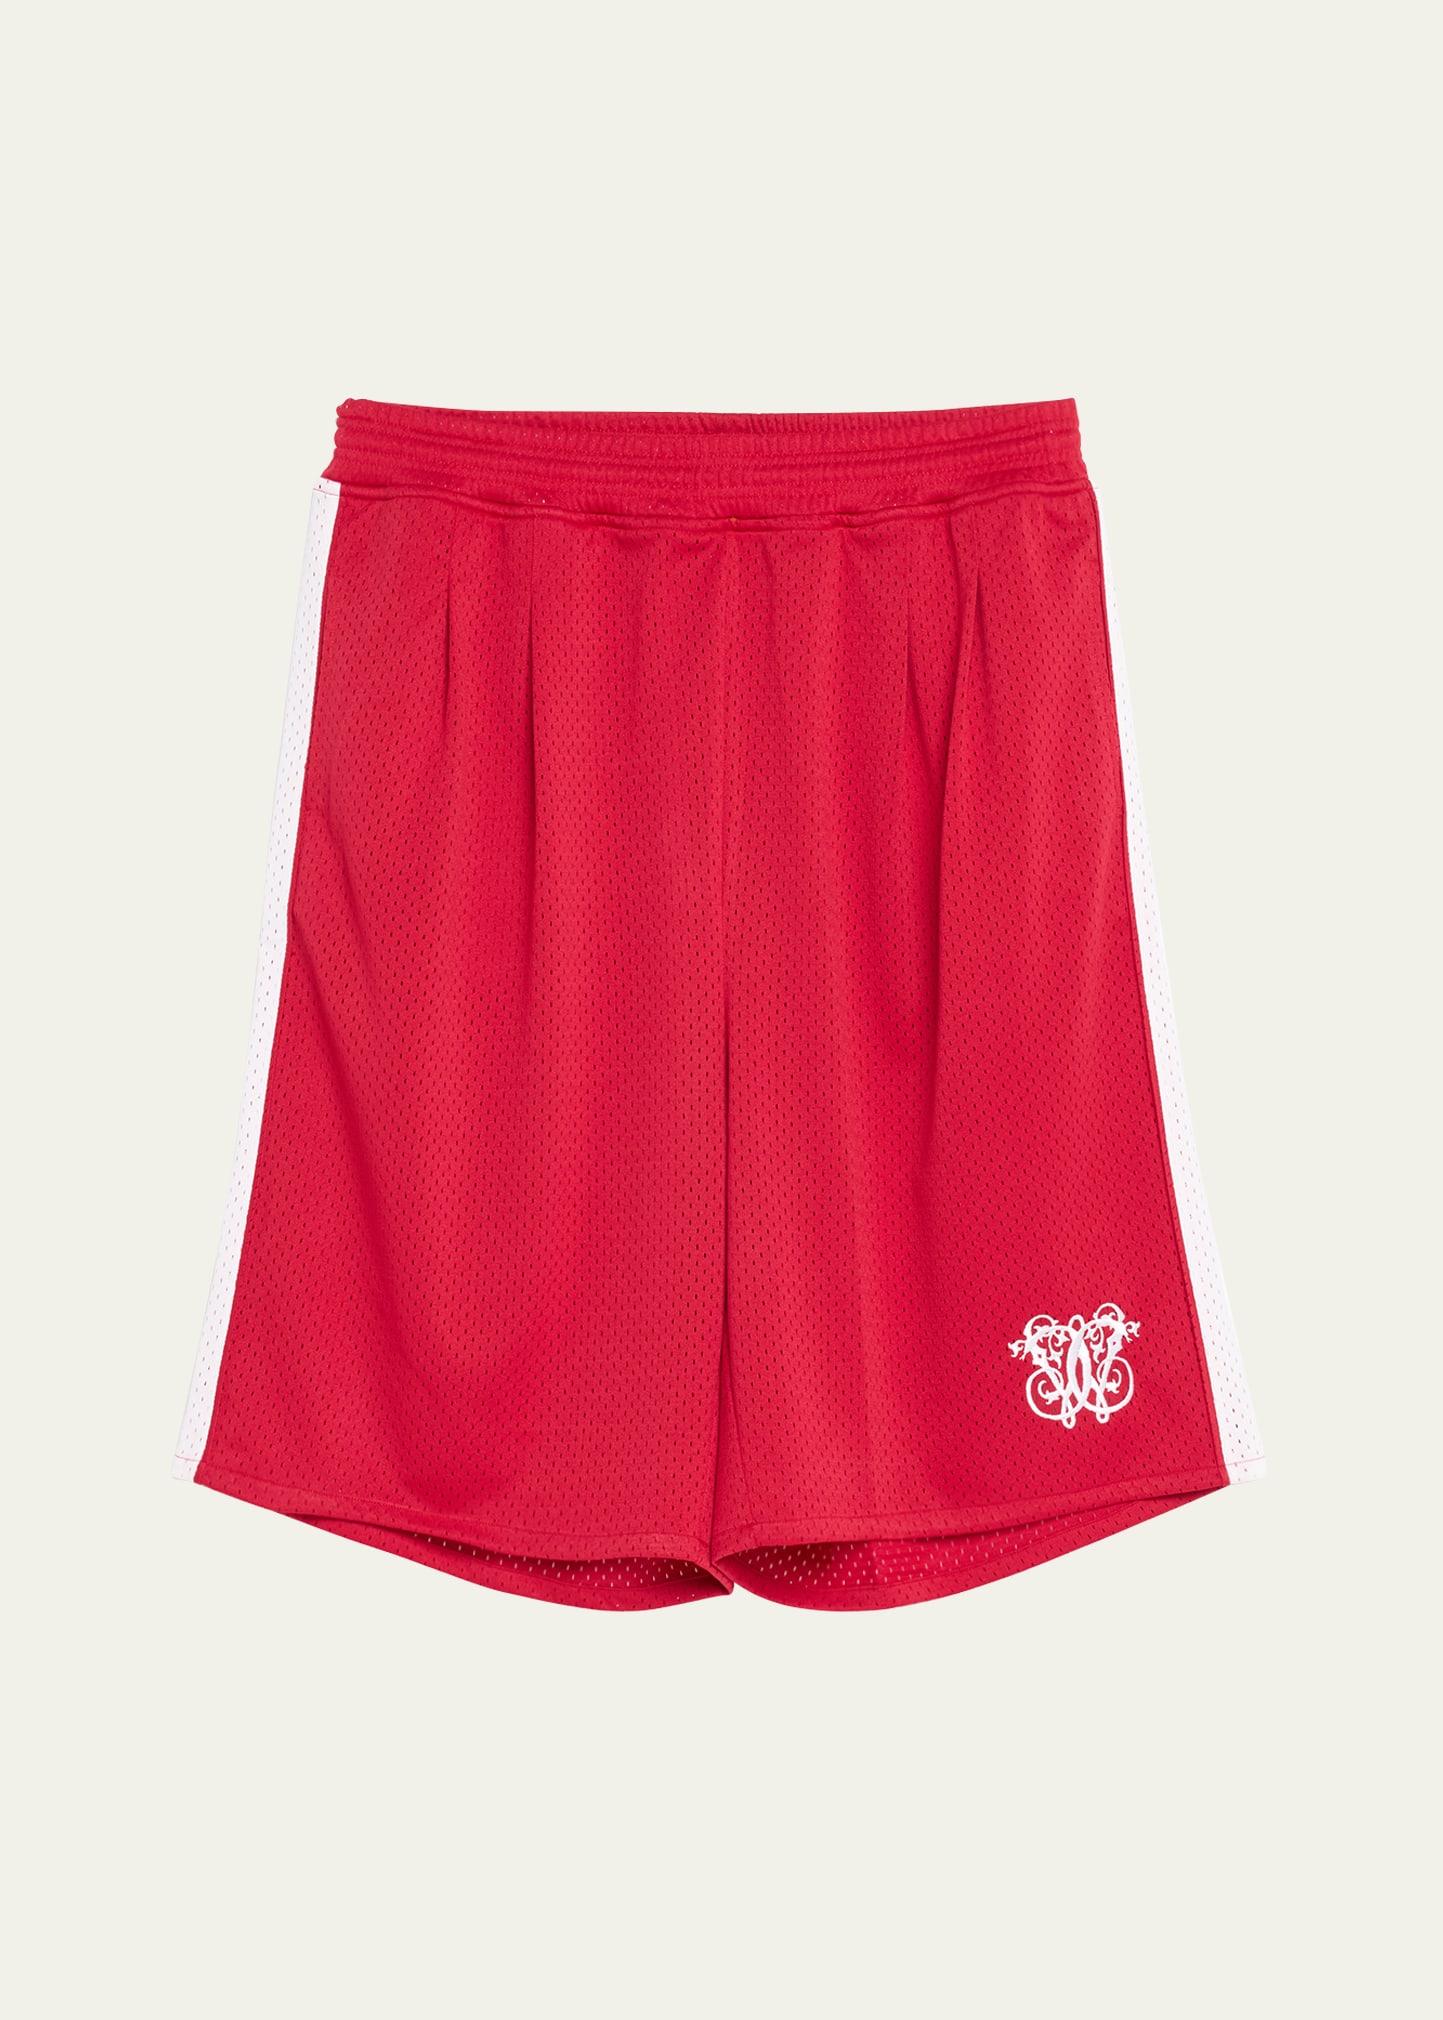 Shop Willy Chavarria Men's Mesh Basketball Shorts In Red White